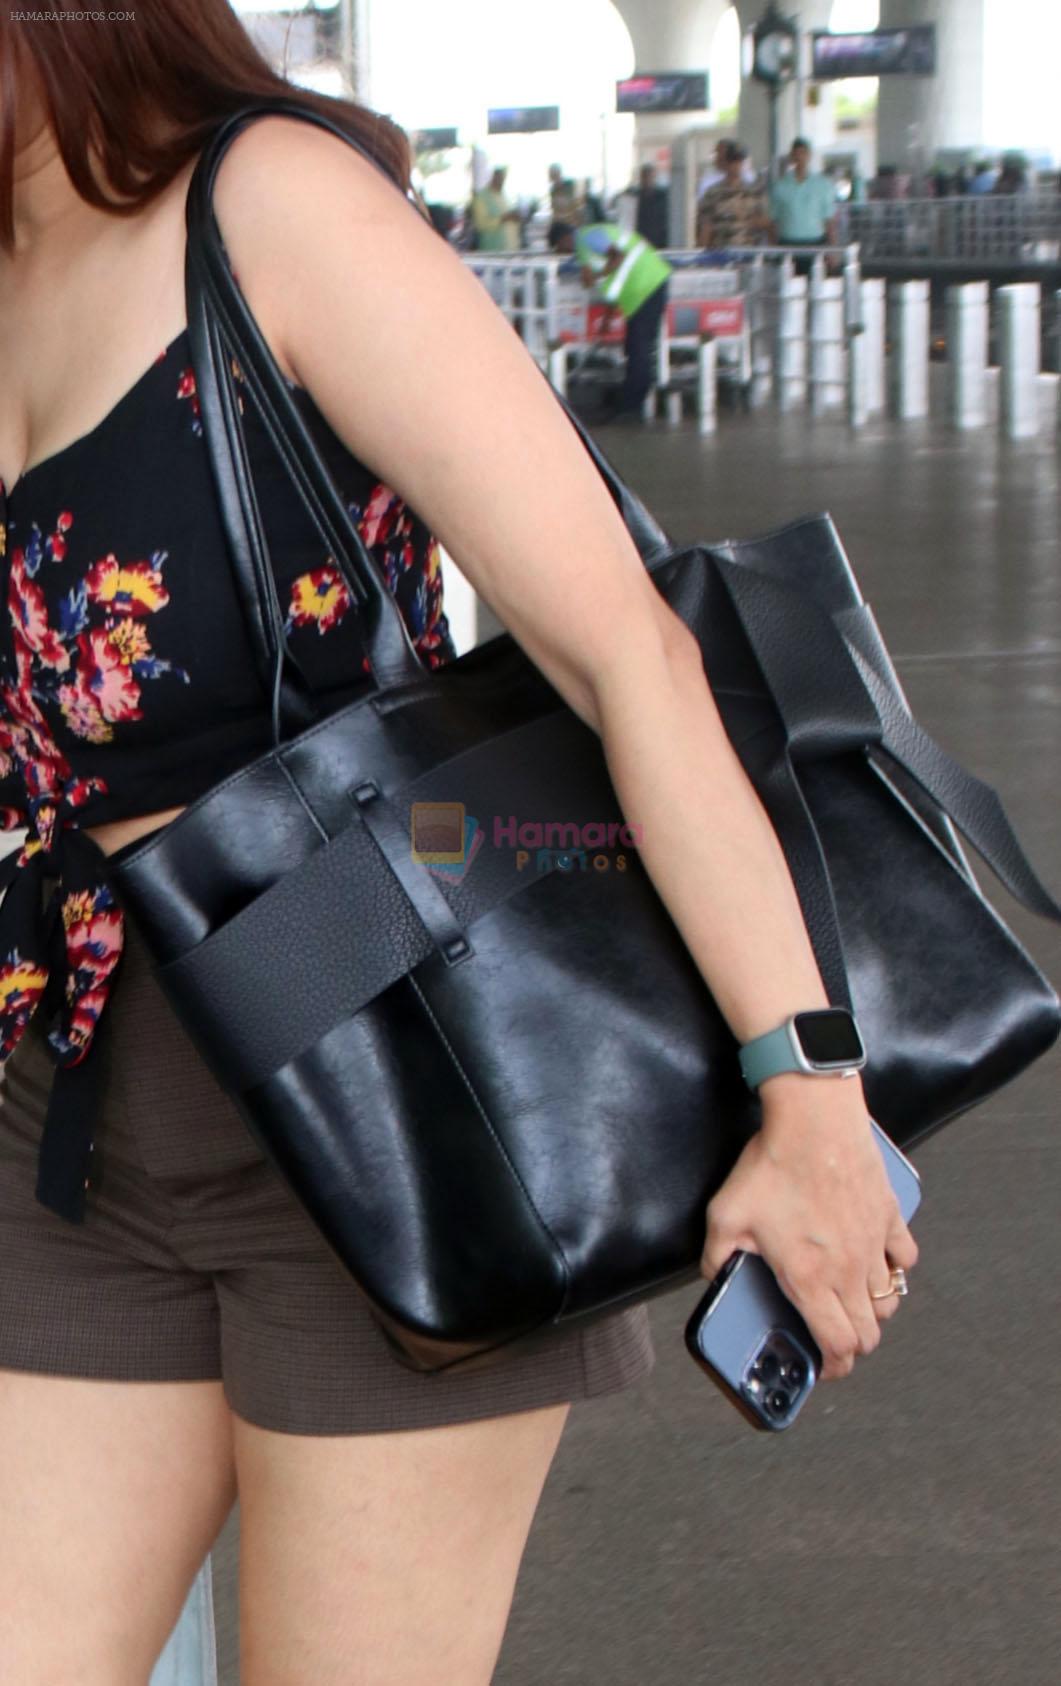 Chahatt Khanna seen in shorts at the airport on 8 July 2023